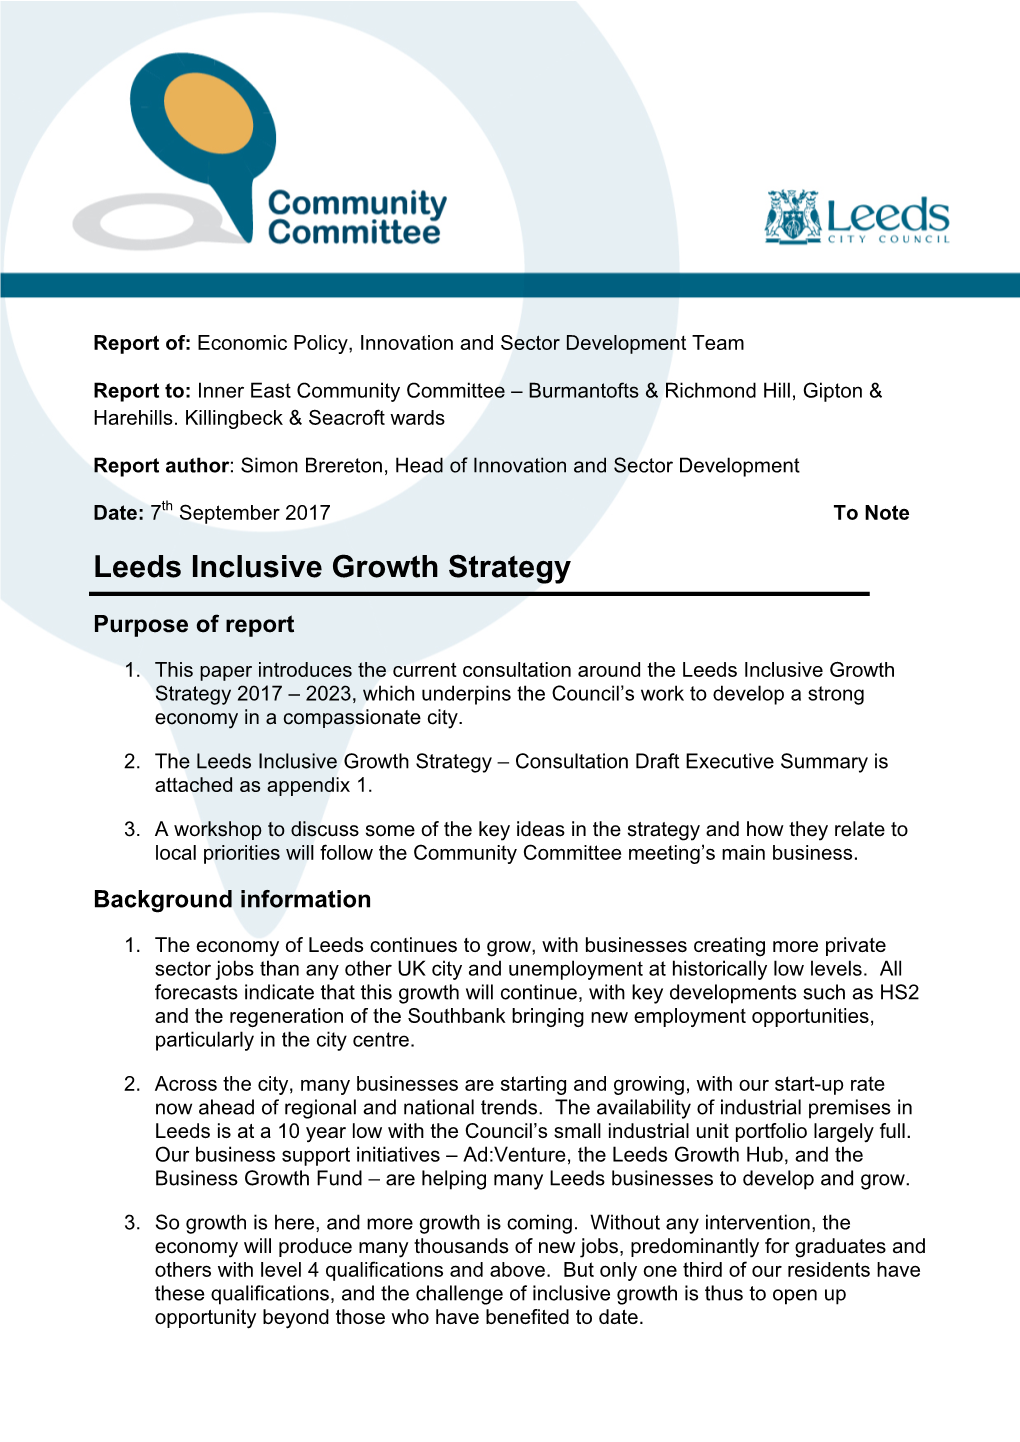 Leeds Inclusive Growth Strategy